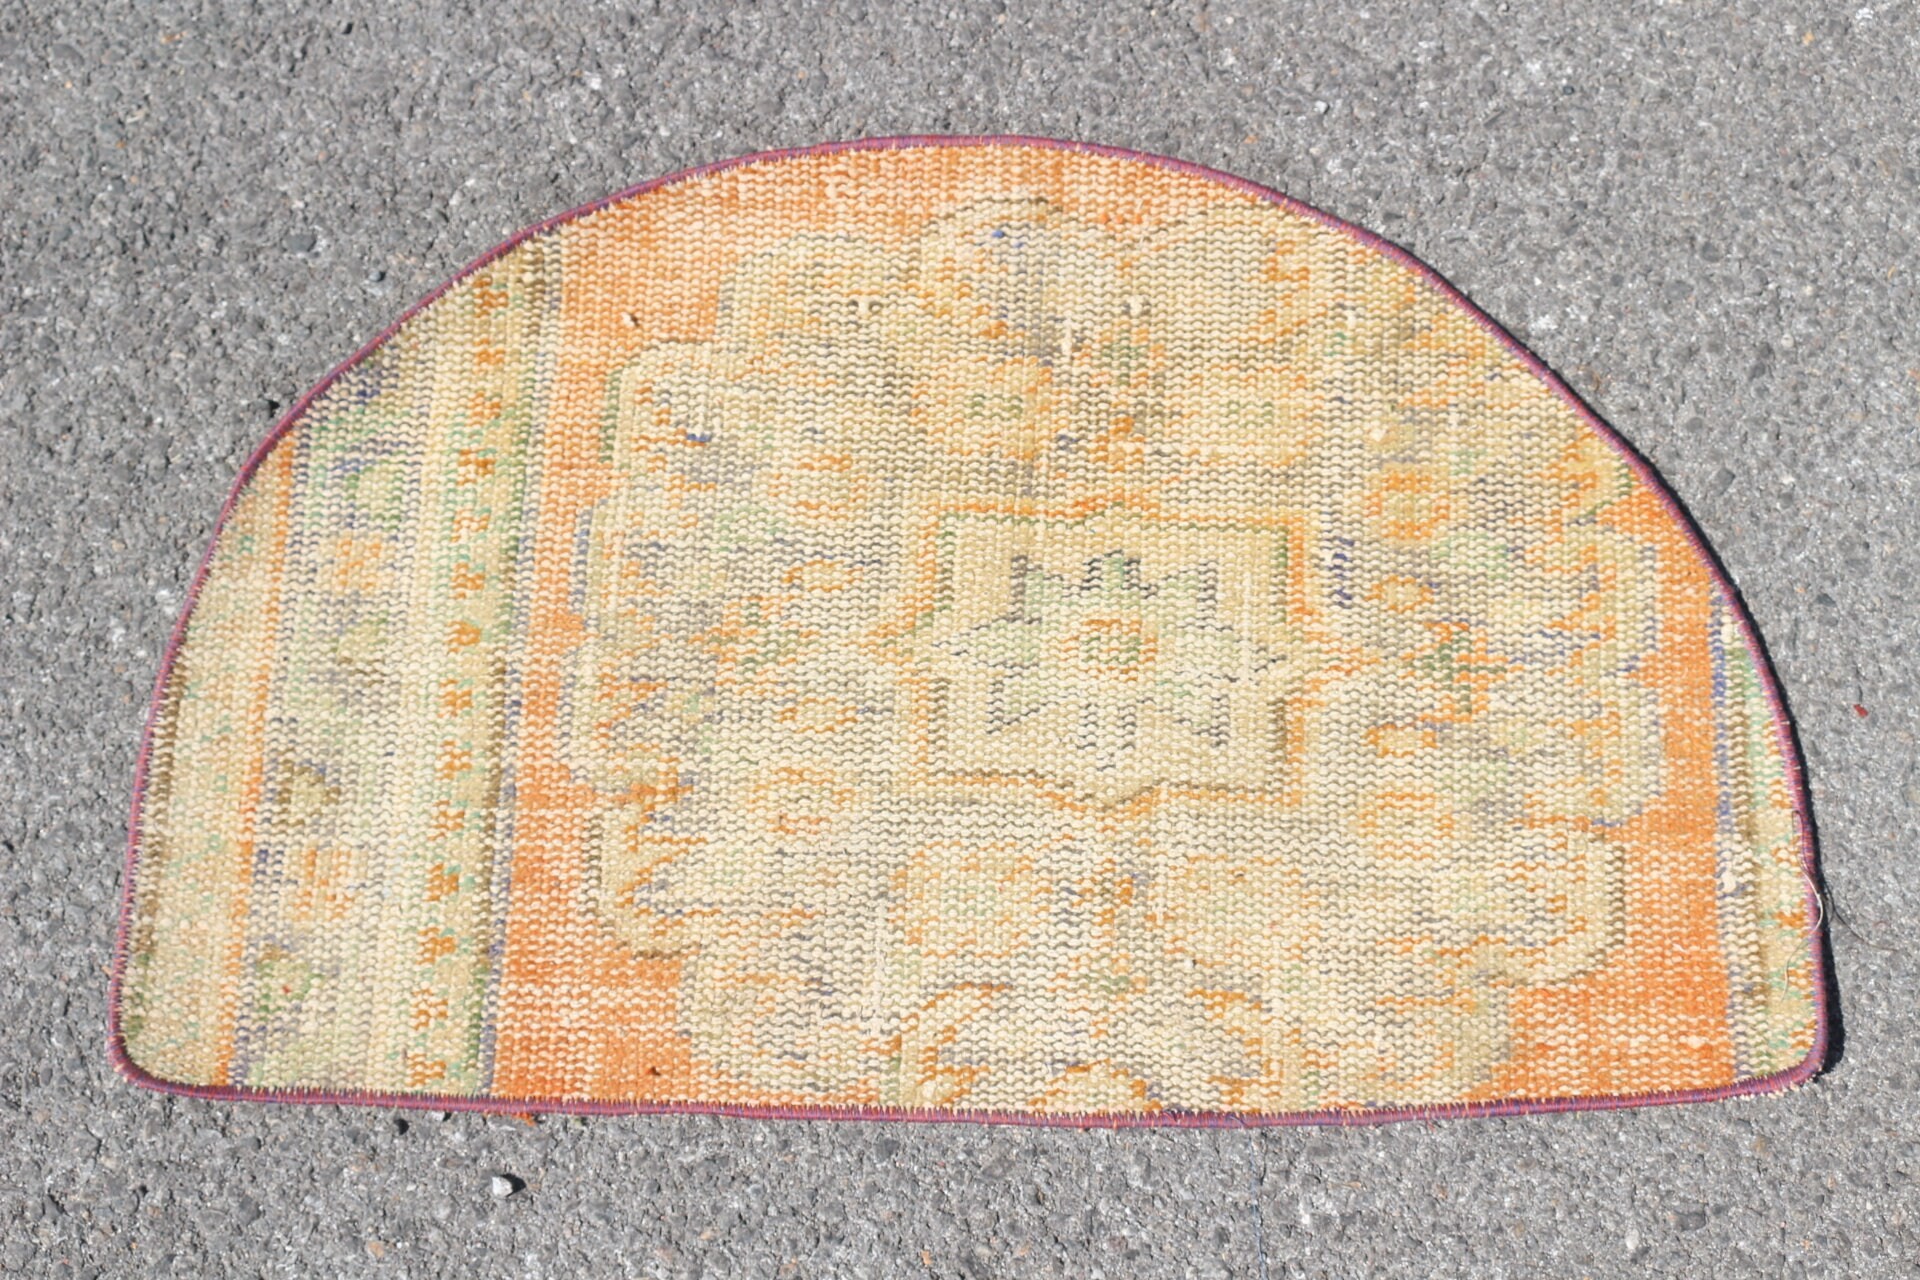 2.5x1.5 ft Small Rug, Turkish Rug, Bathroom Rug, Home Decor Rugs, Moroccan Rug, Entry Rug, Beige Antique Rug, Vintage Rugs, Rugs for Entry